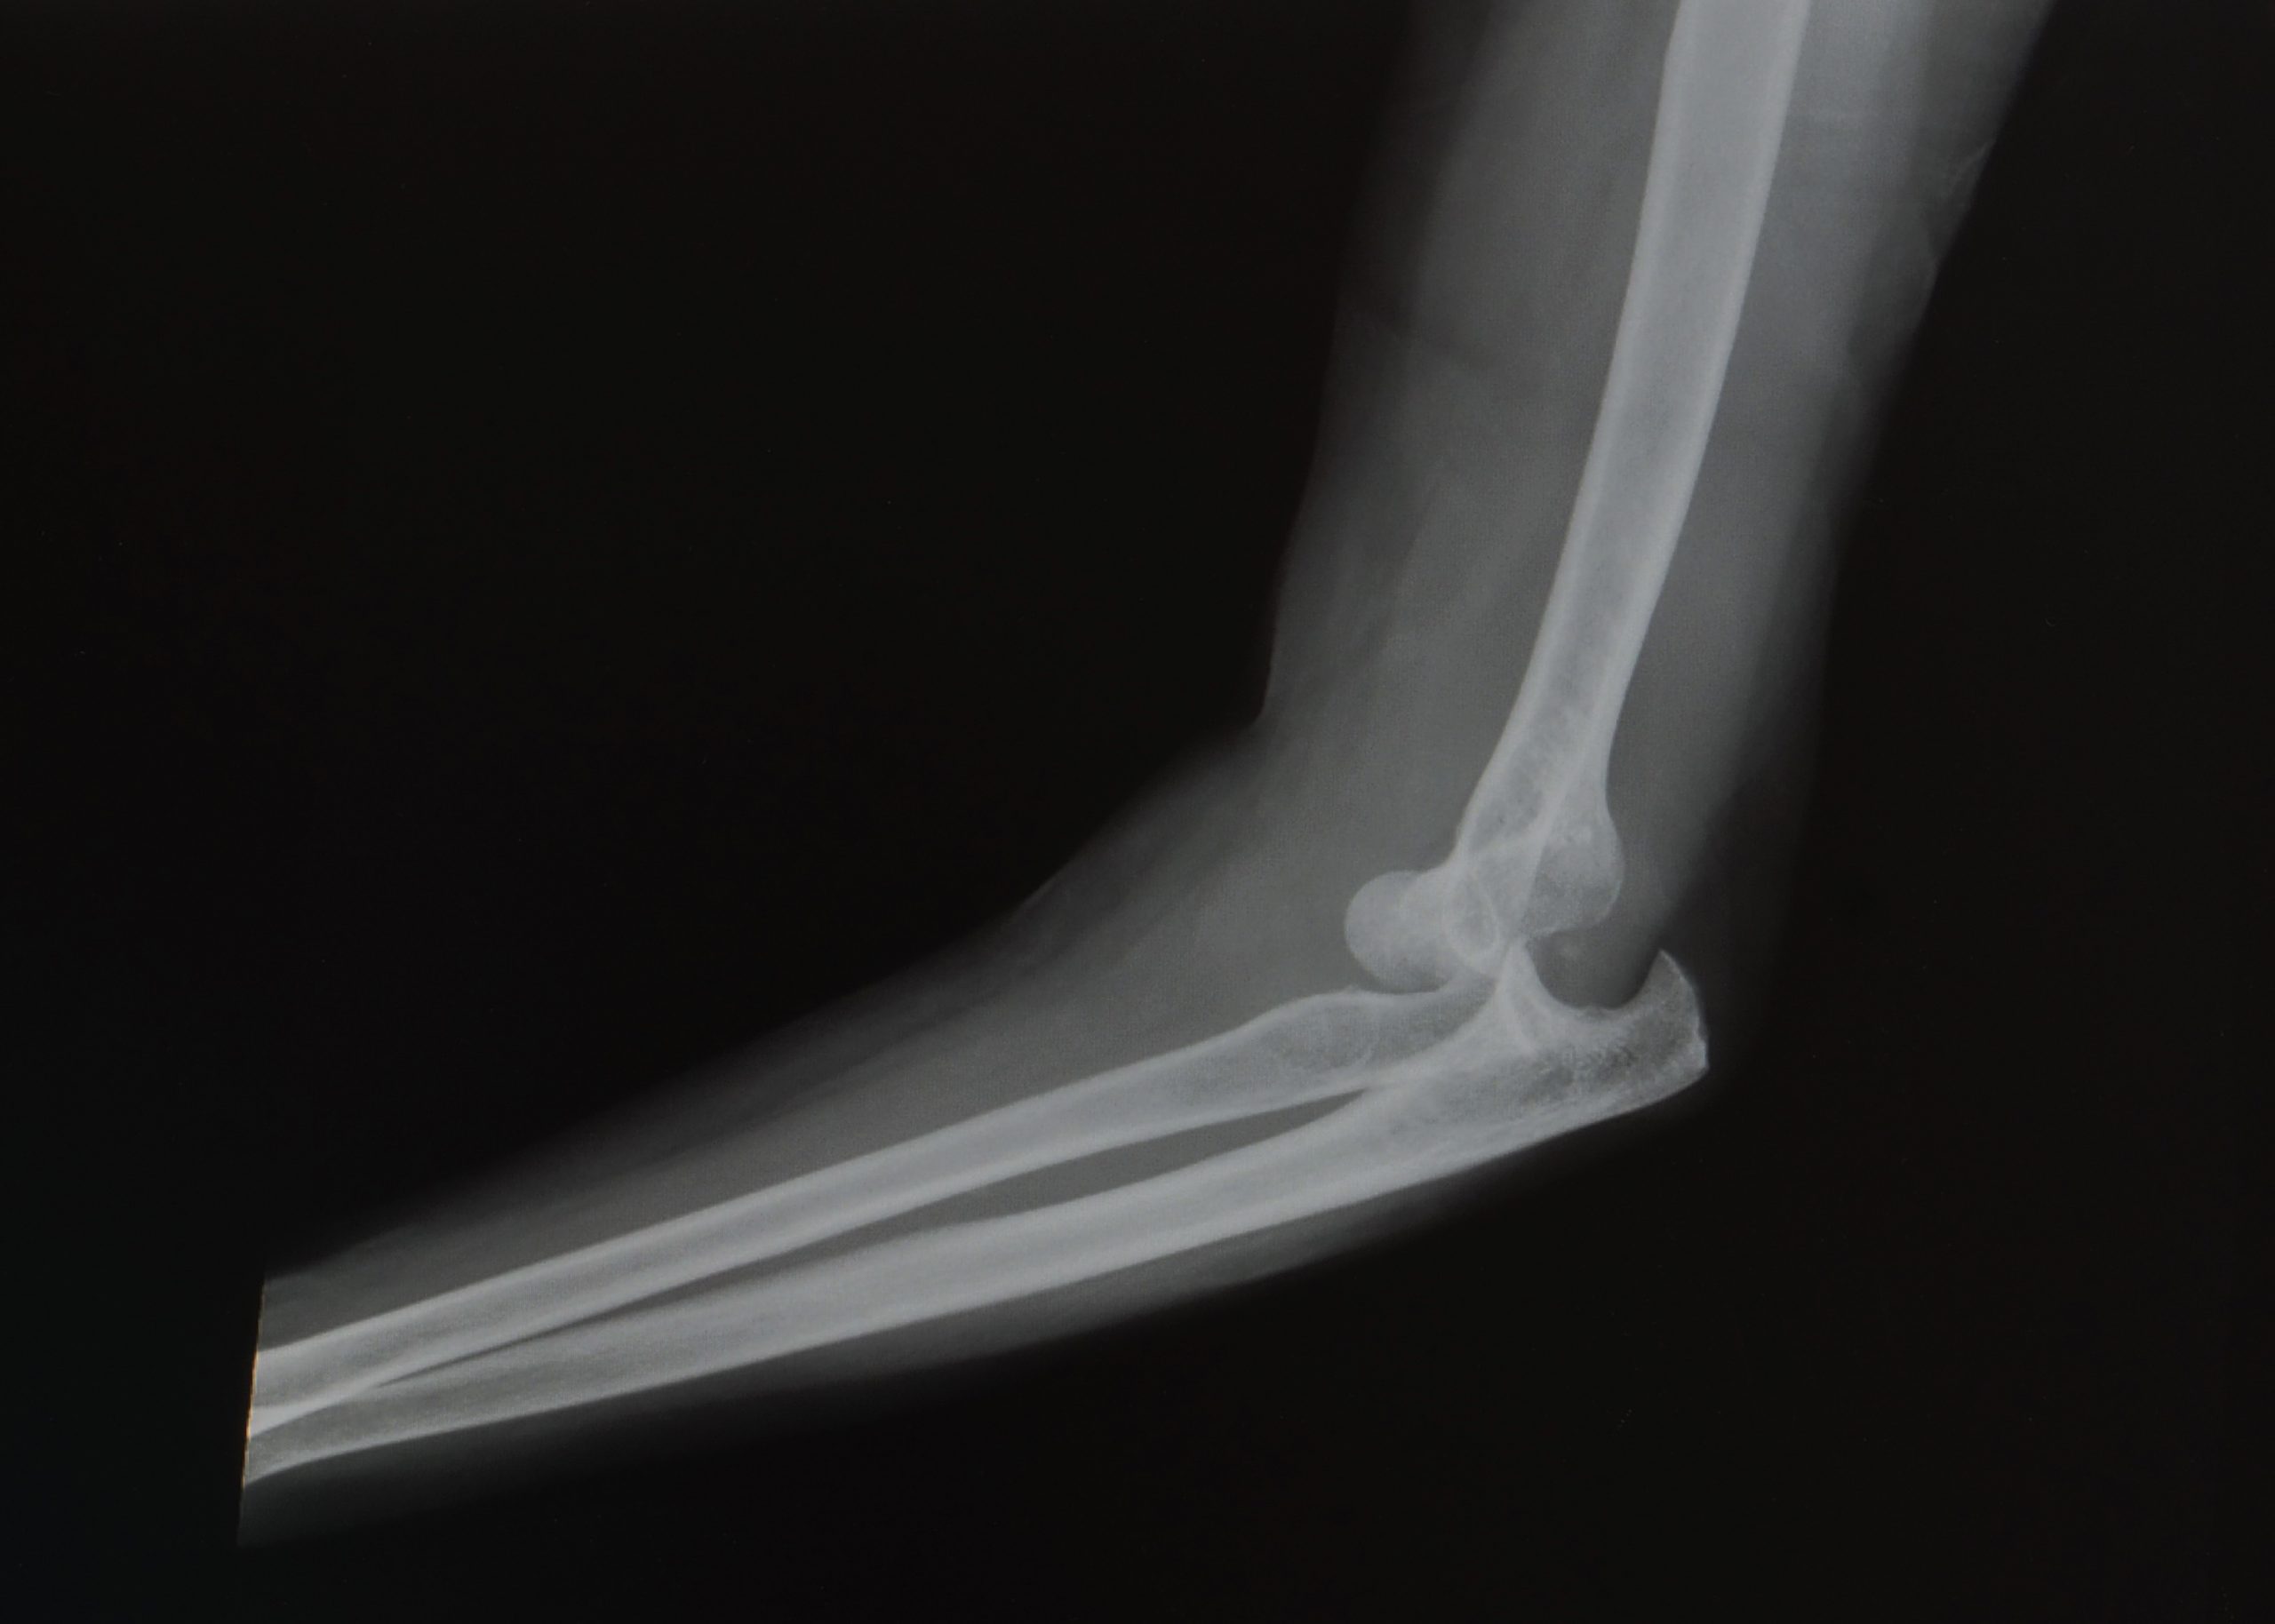 What causes chronic elbow dislocation?